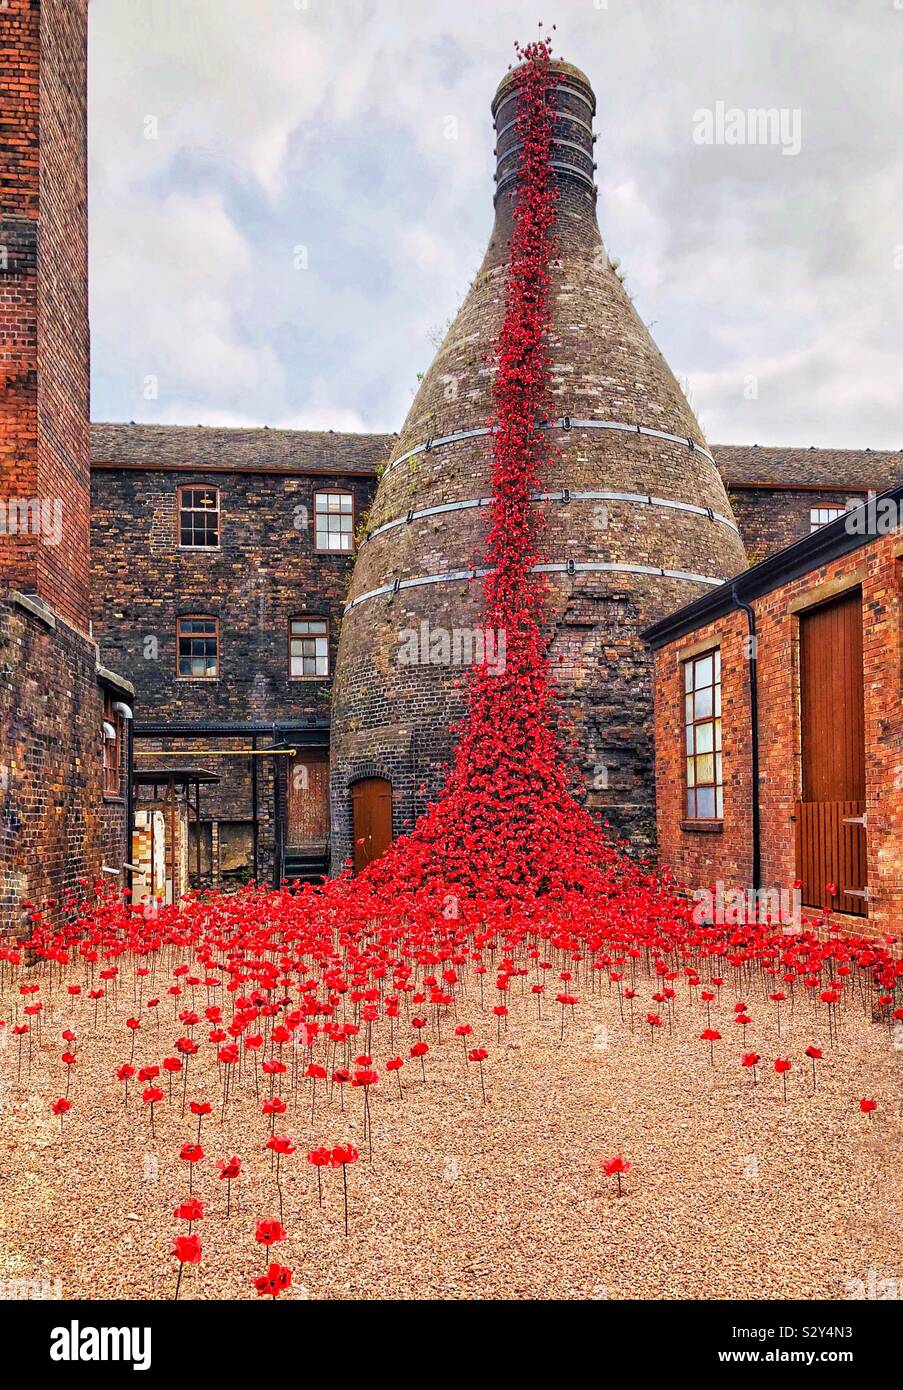 14-18 War Poppy Tour Middleport Pottery Stoke on Trent Weeping Window Stock Photo